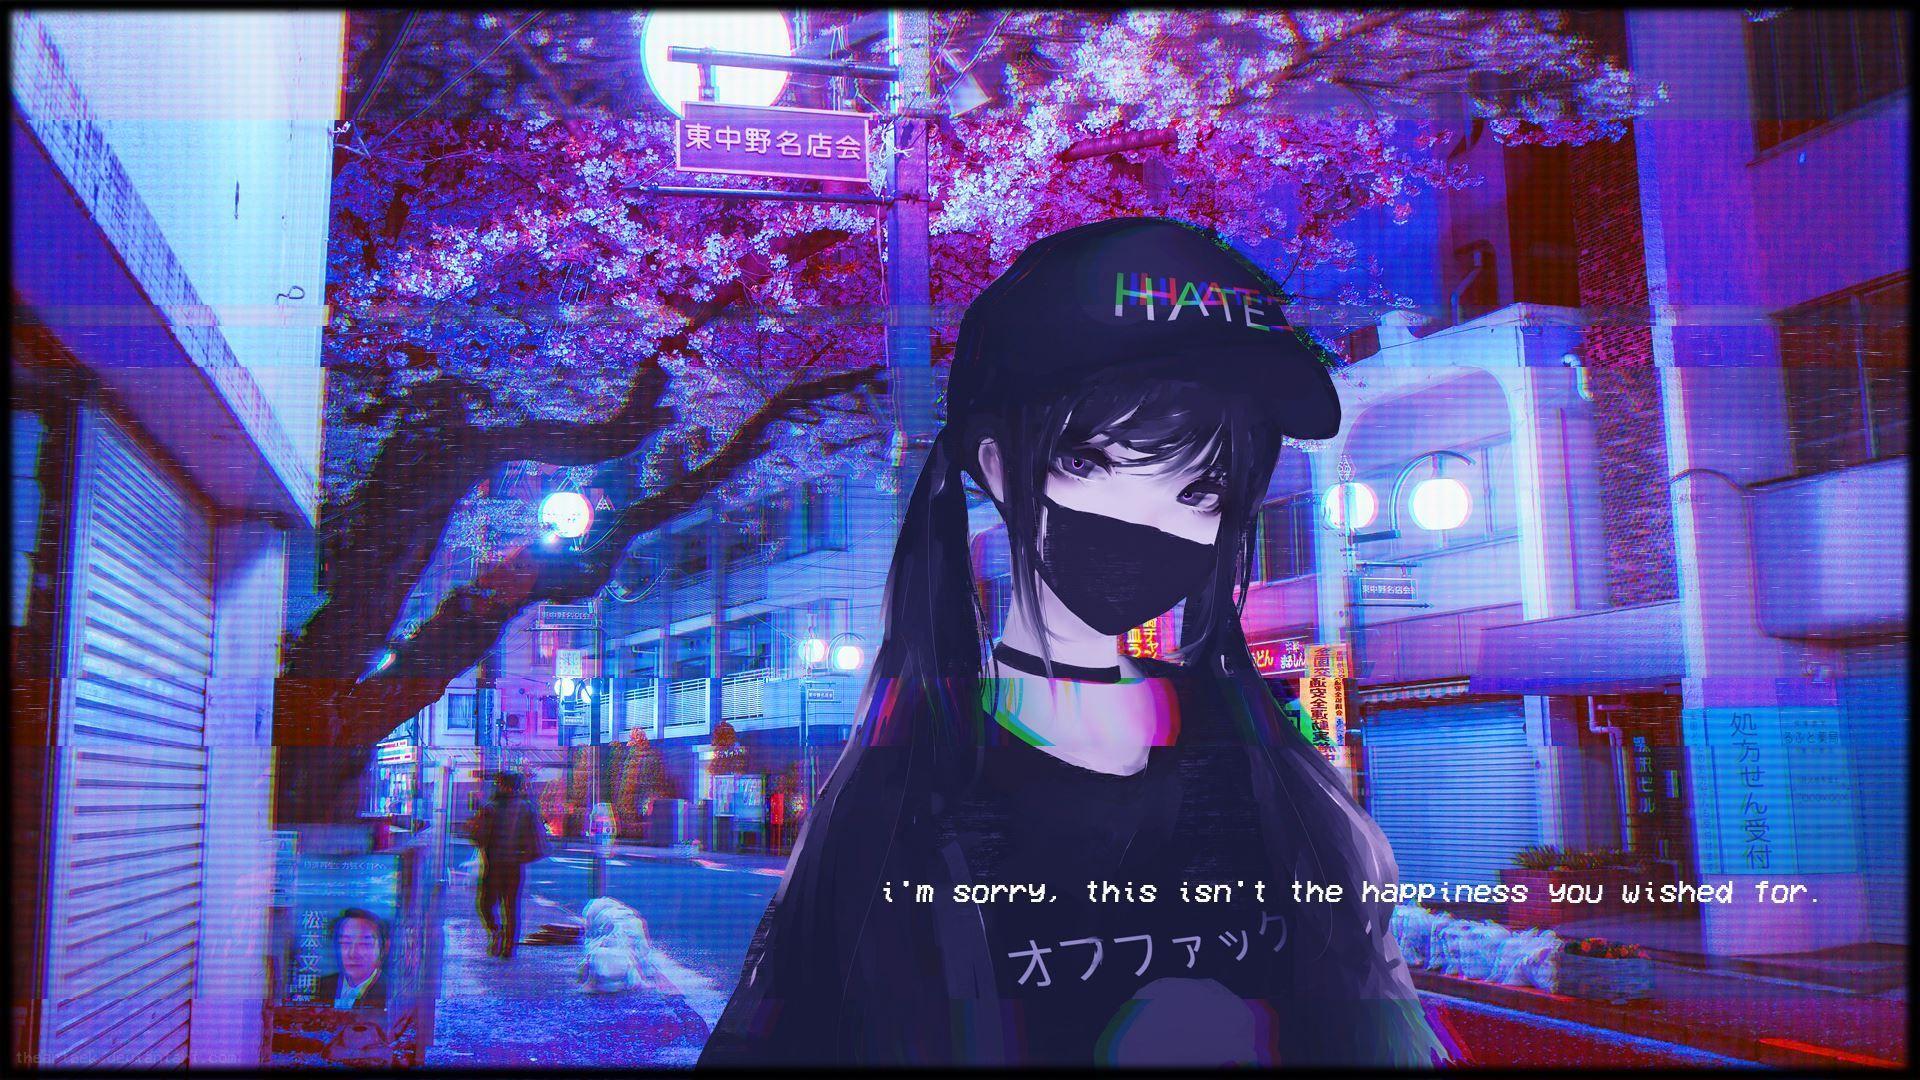 VHS Glitch Anime Girl Wallpapers - Wallpaper Cave